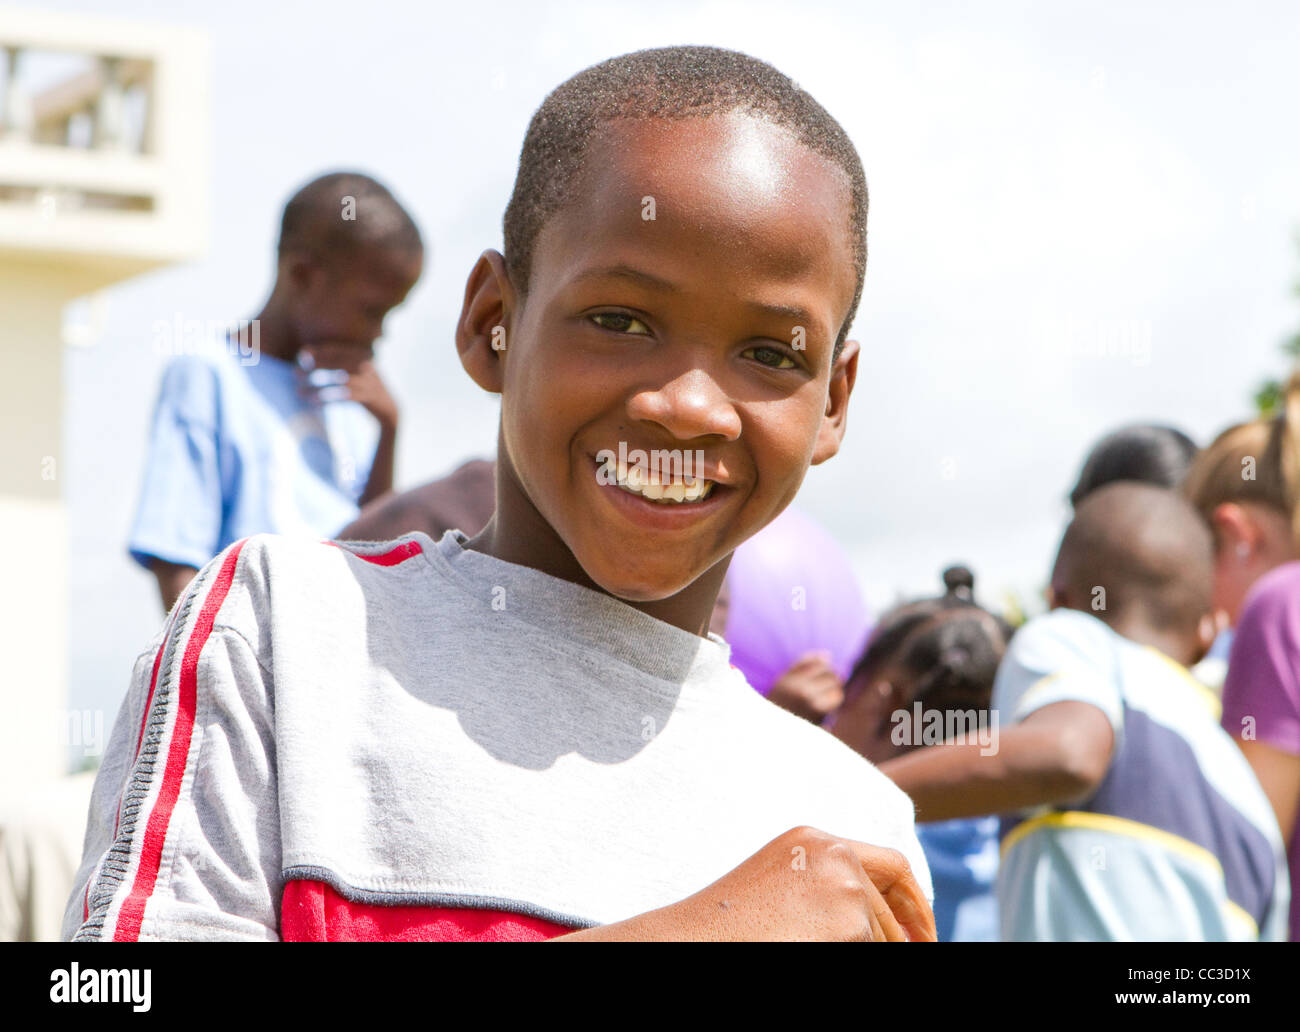 Jamaican orphan boy with broken front teeth smiling. Stock Photo